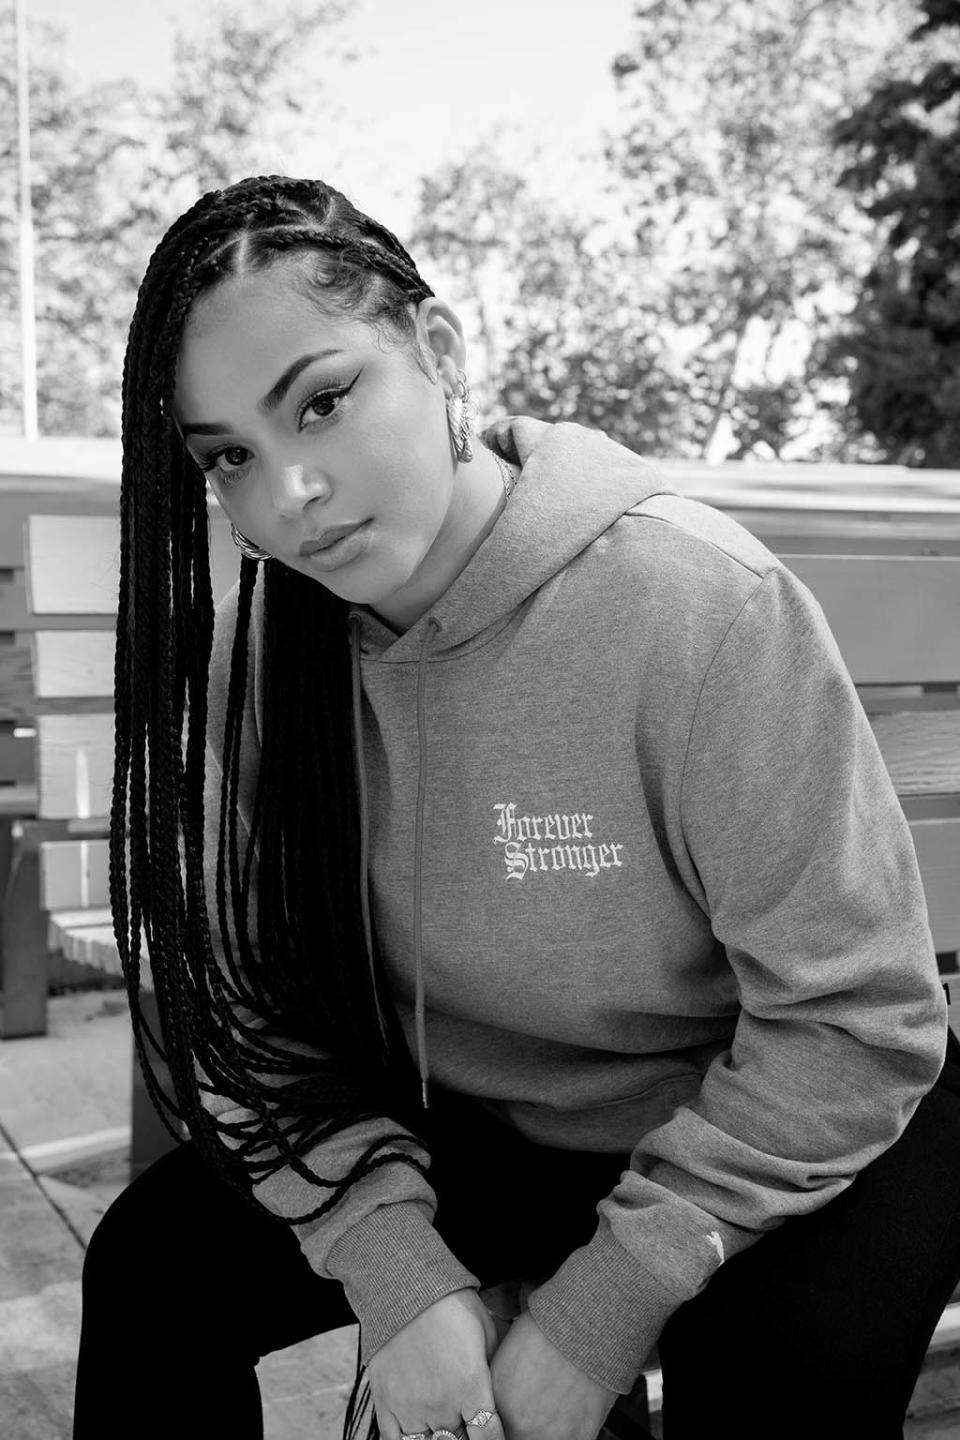 Lauren London in a hoodie from her Puma “Forever Stronger 2” range.